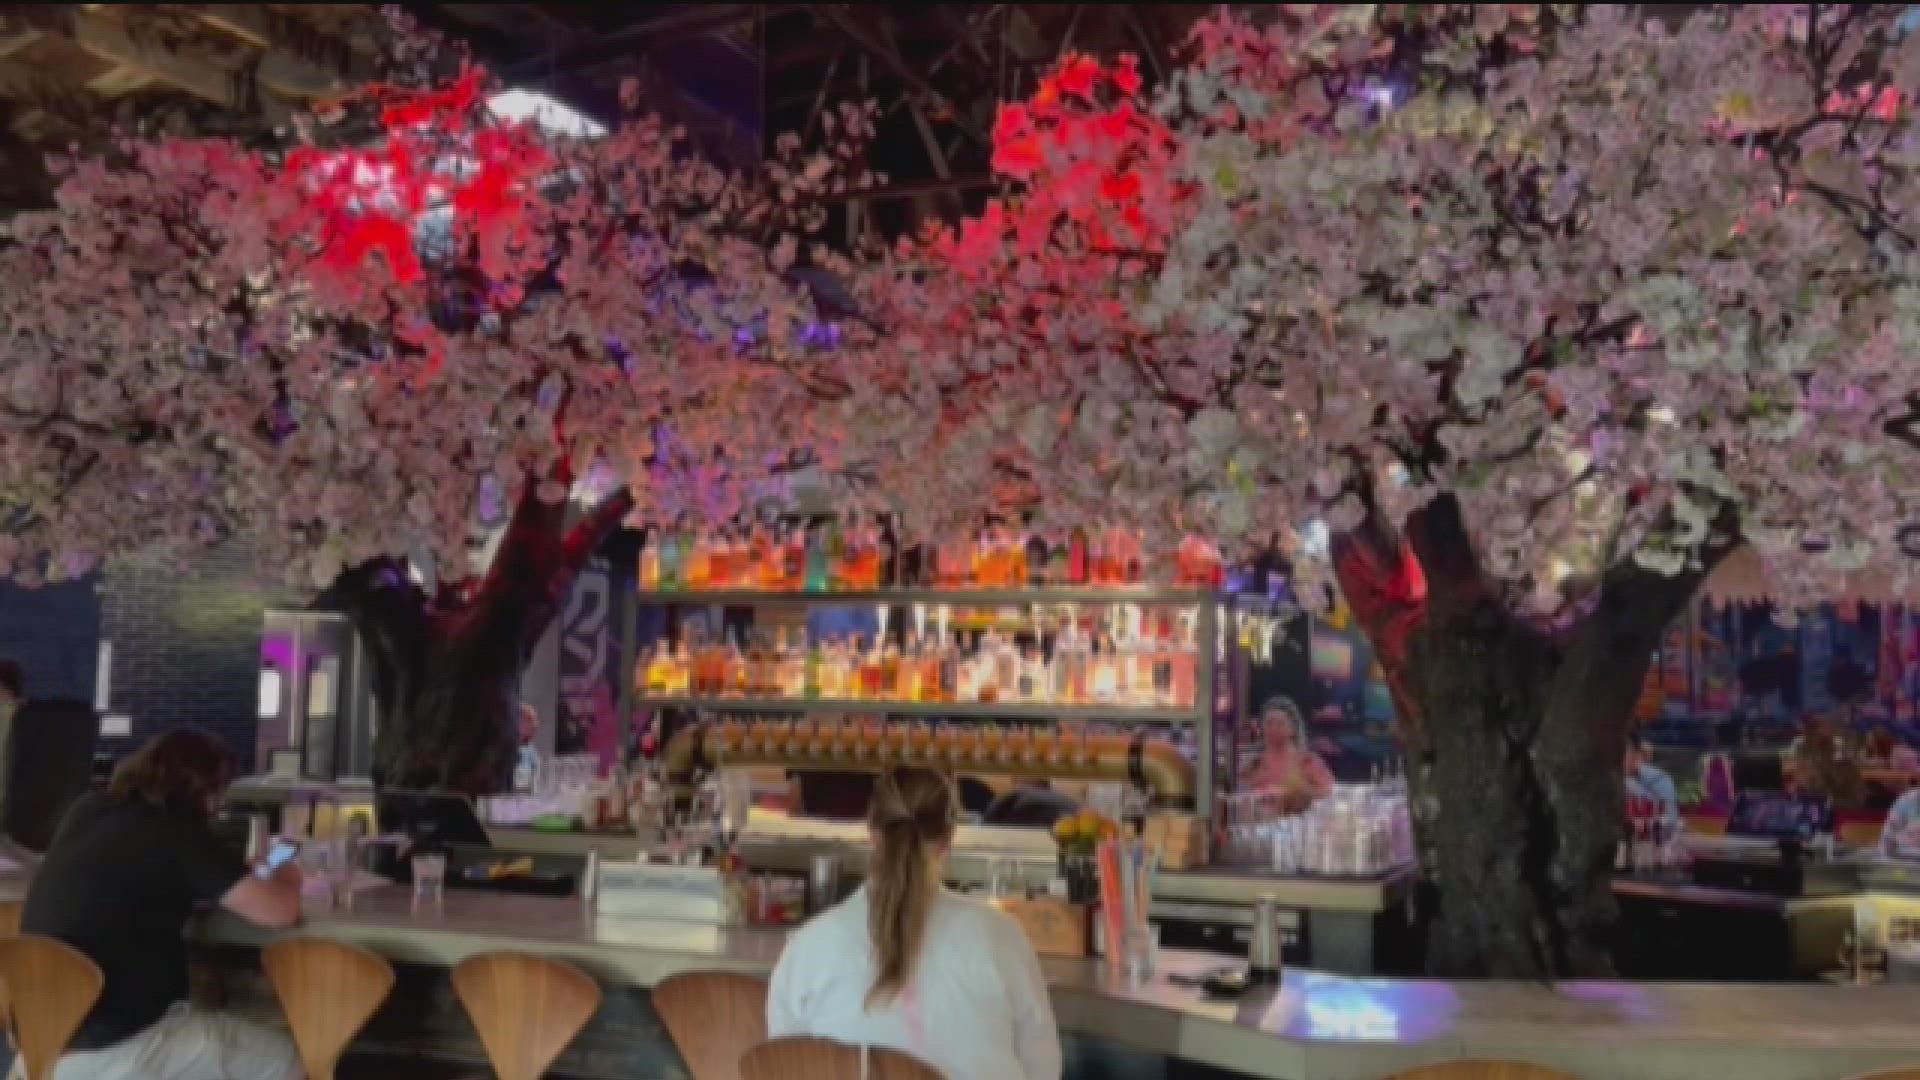 It's a Japanese fusion restaurant in Little Italy. They are known for the big cherry blossom trees inside the business.